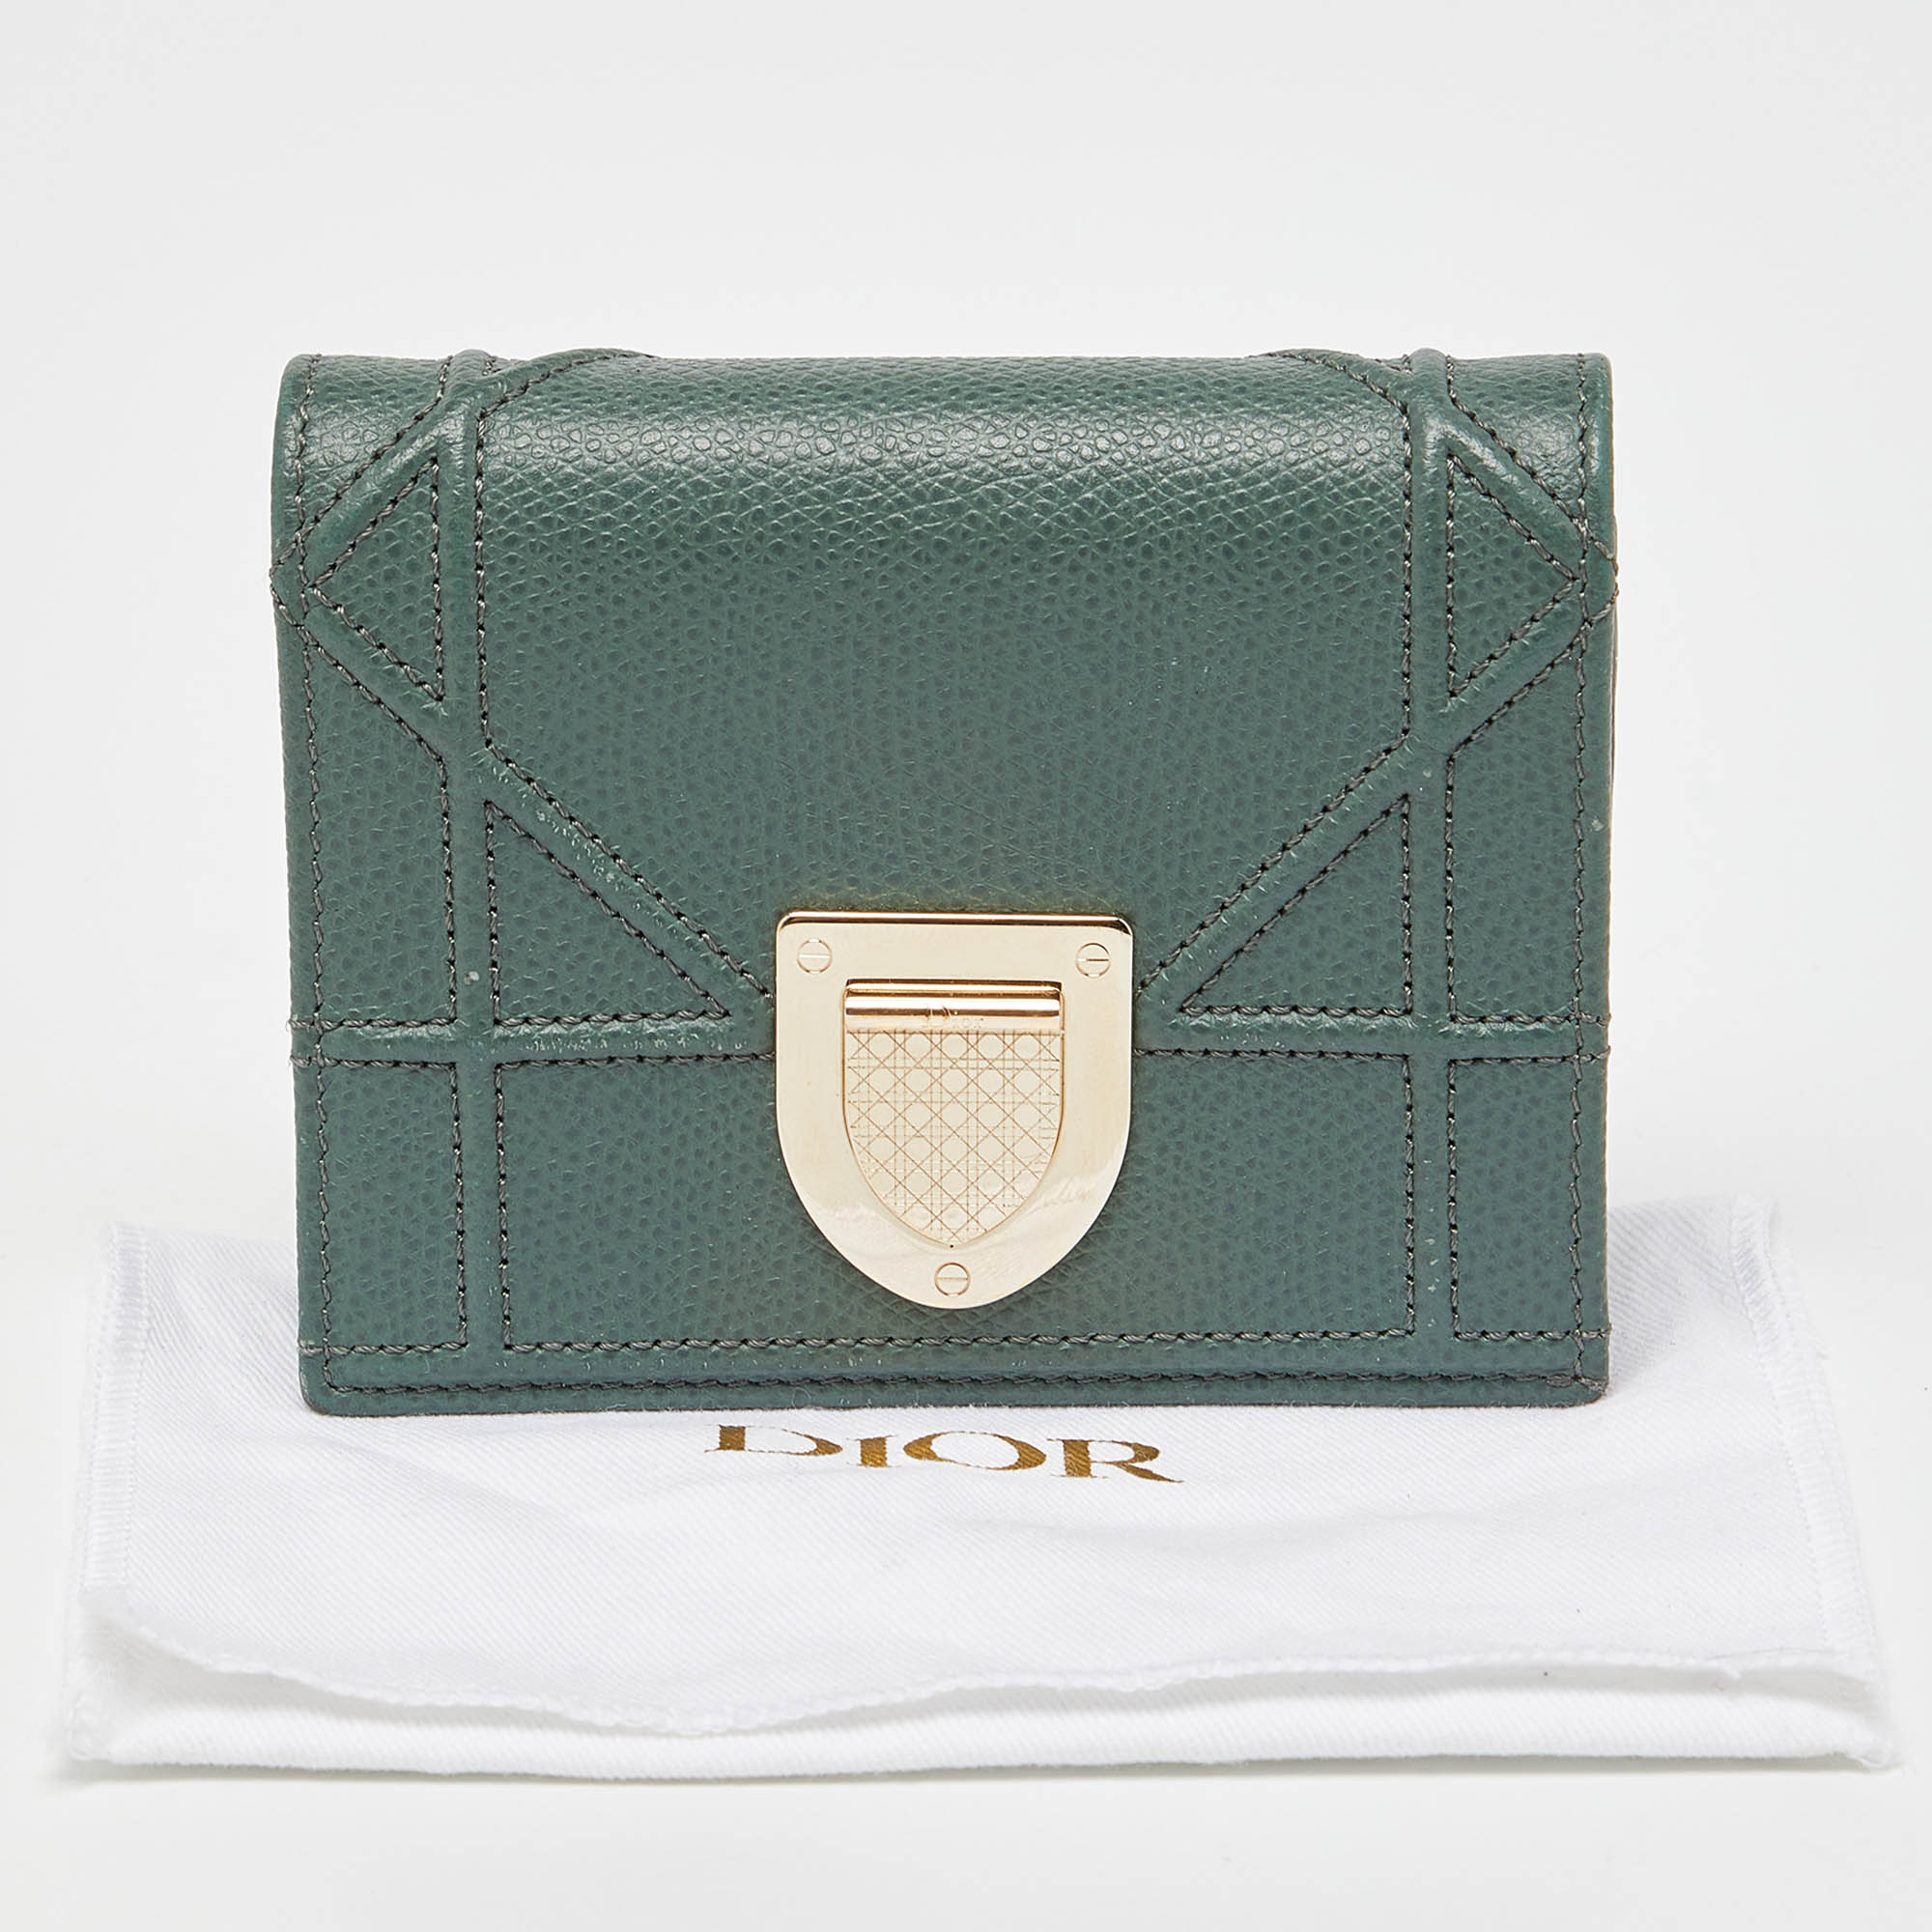 Dior Green Leather Diorama Trifold Wallet